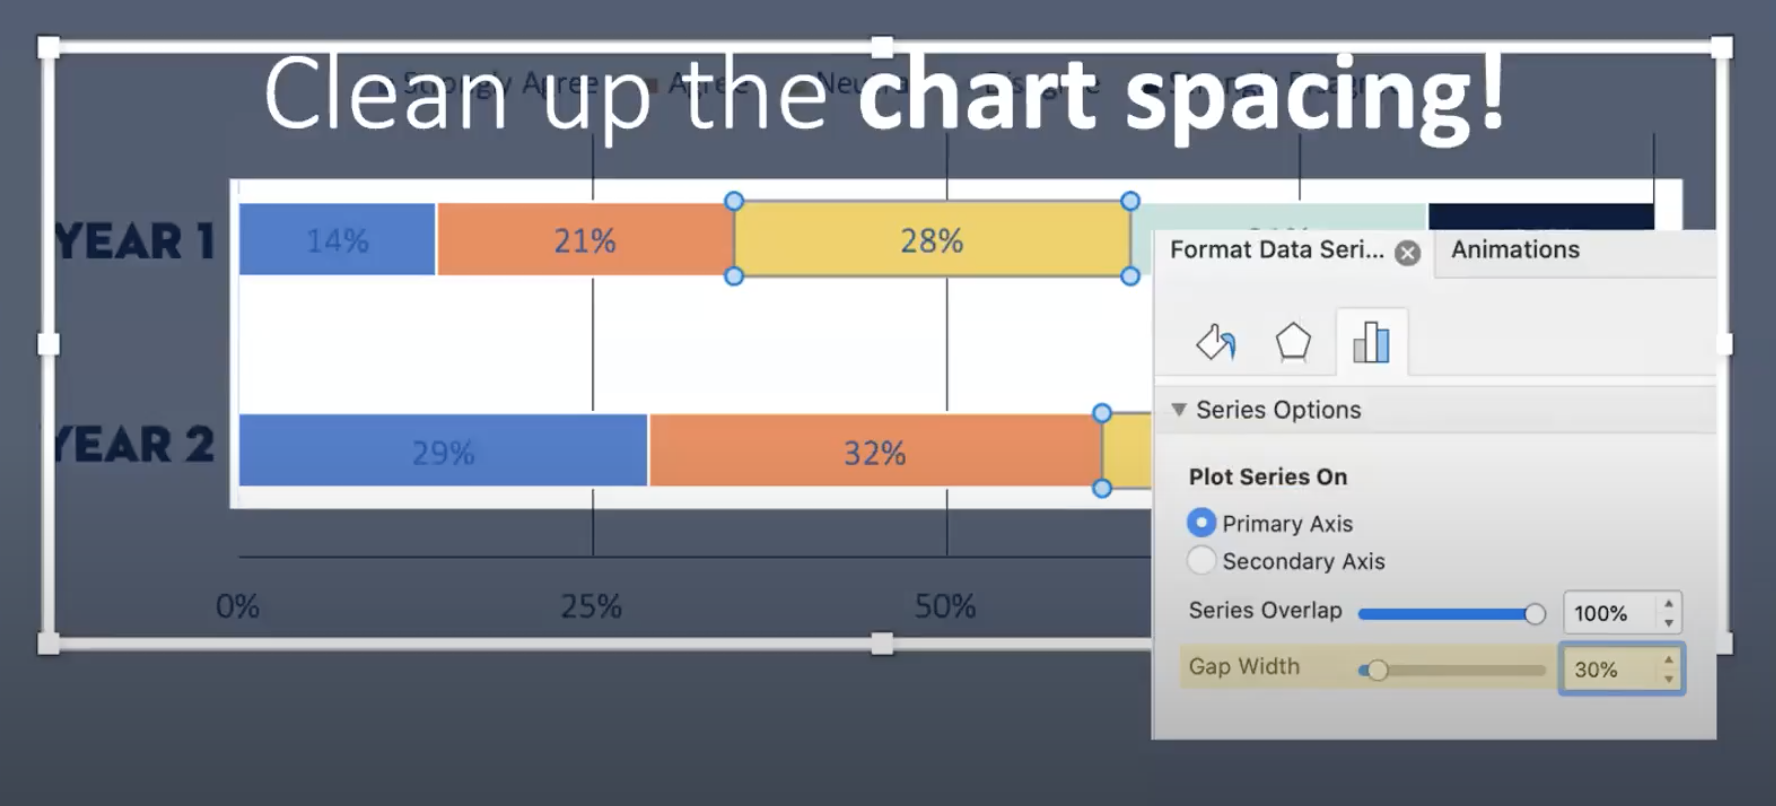 The instructions to format the data series in PowerPoint include: selecting "Format Data Series", selecting "Primary Axis" and adjusting the "Gap Width"